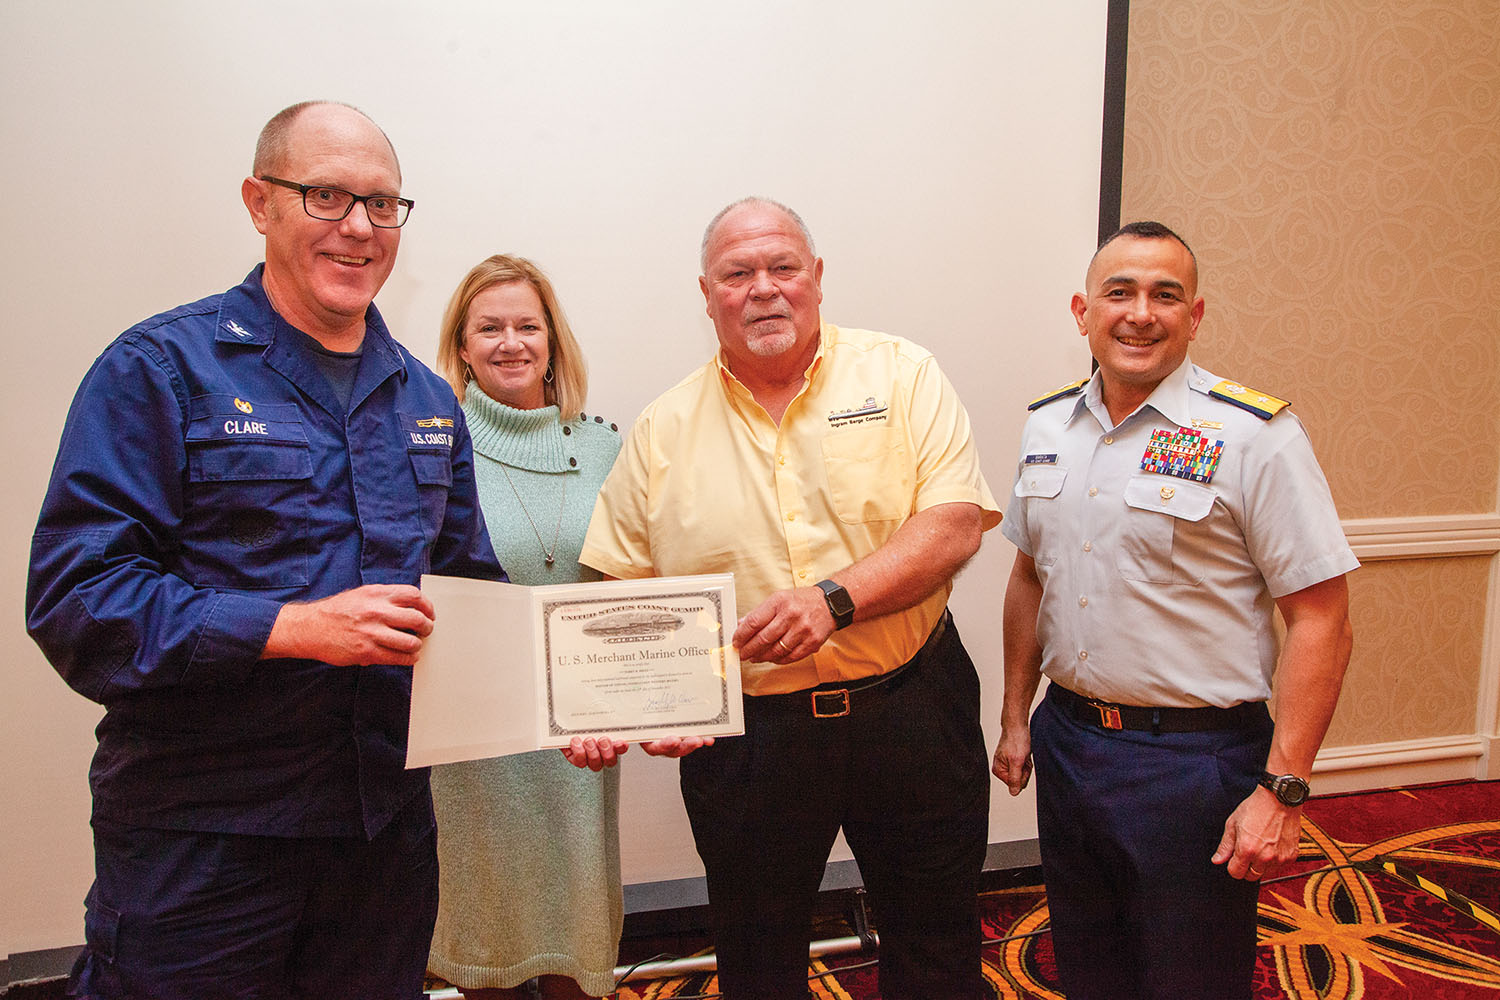 From left, Capt. Bradley Clare, Susan Dietz, Capt. Terry Dietz and Rear Adm. David Barata. Capt. Dietz was honored at the December meeting of the Marine Compliance Alliance. (Photo by Frank McCormack)